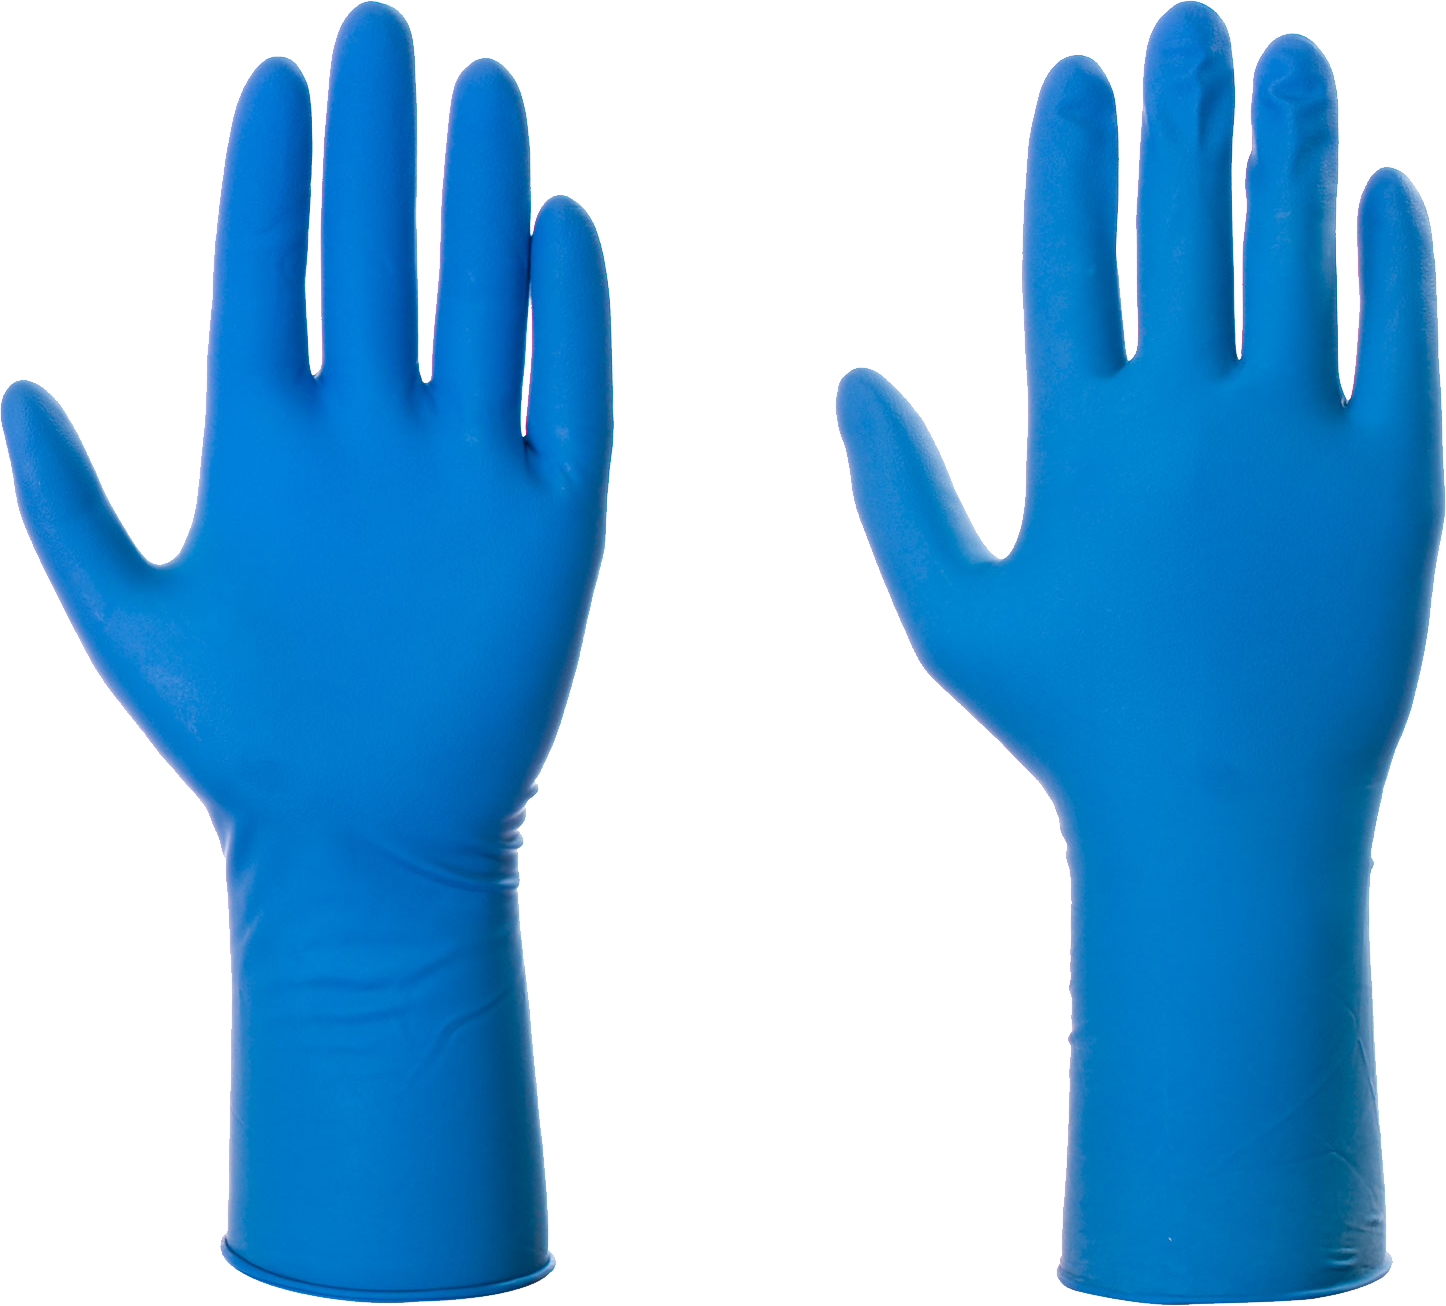 Png transparent images pluspng. Gloves clipart latex glove